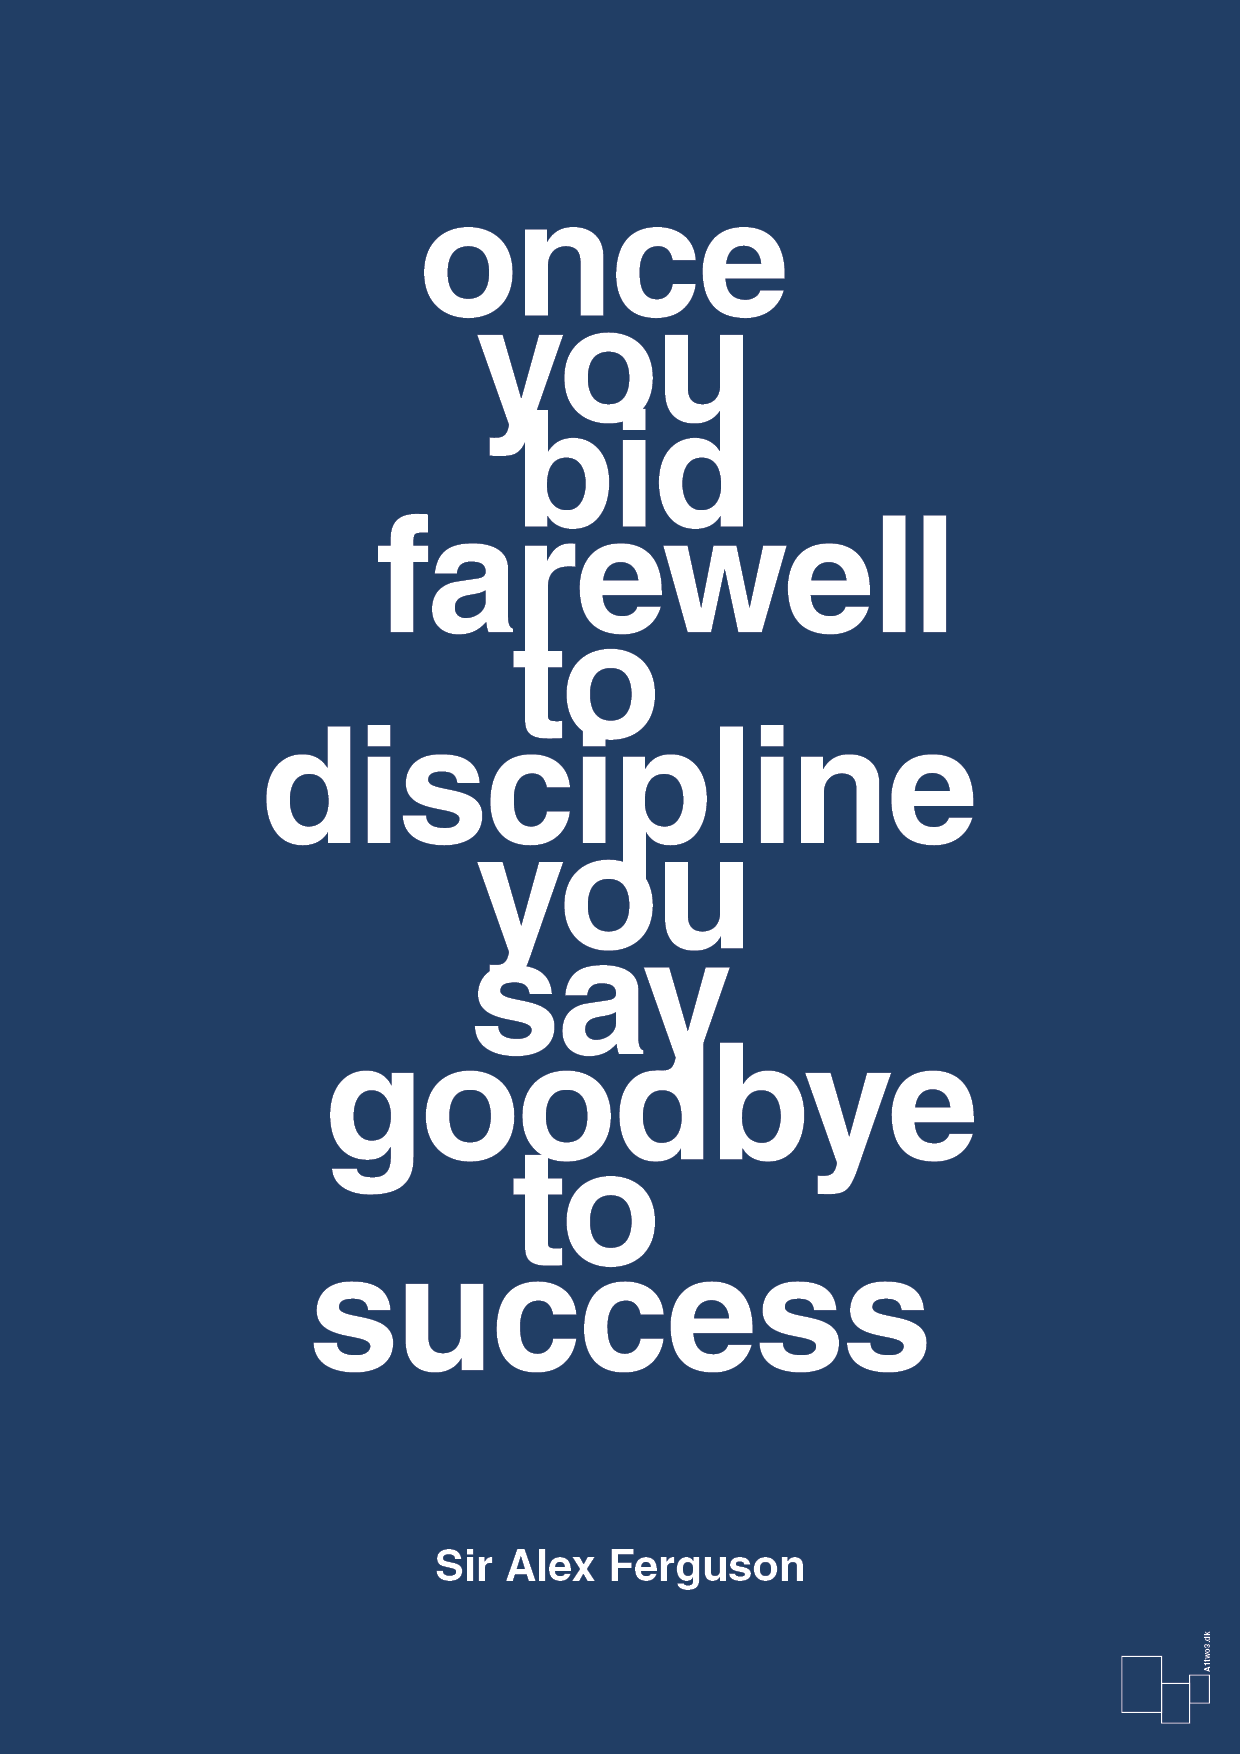 once you bid farewell to discipline you say goodbye to success - Plakat med Citater i Lapis Blue